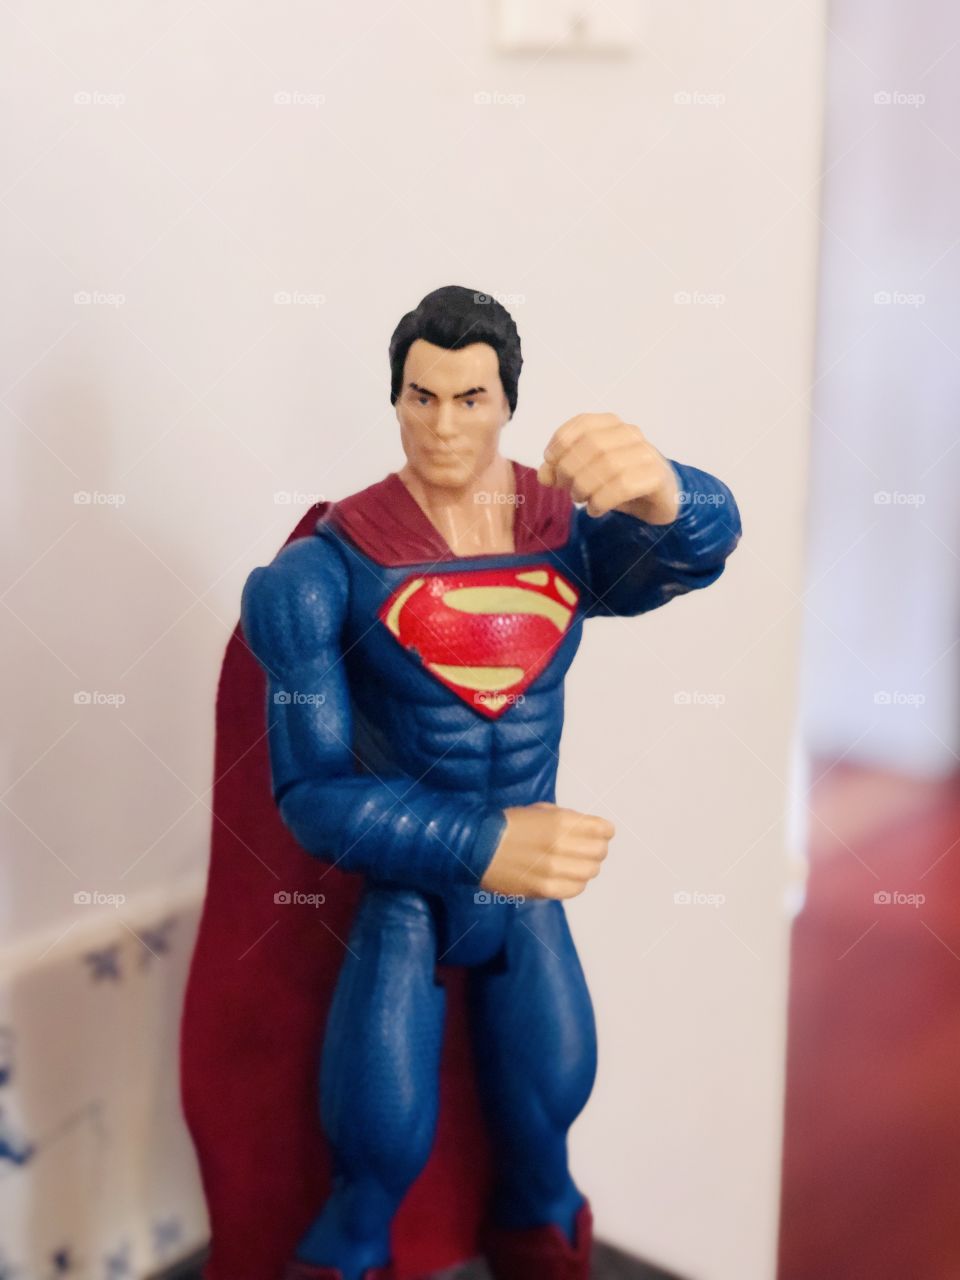 Superman toy action figure ready to deliver a punch of steel!